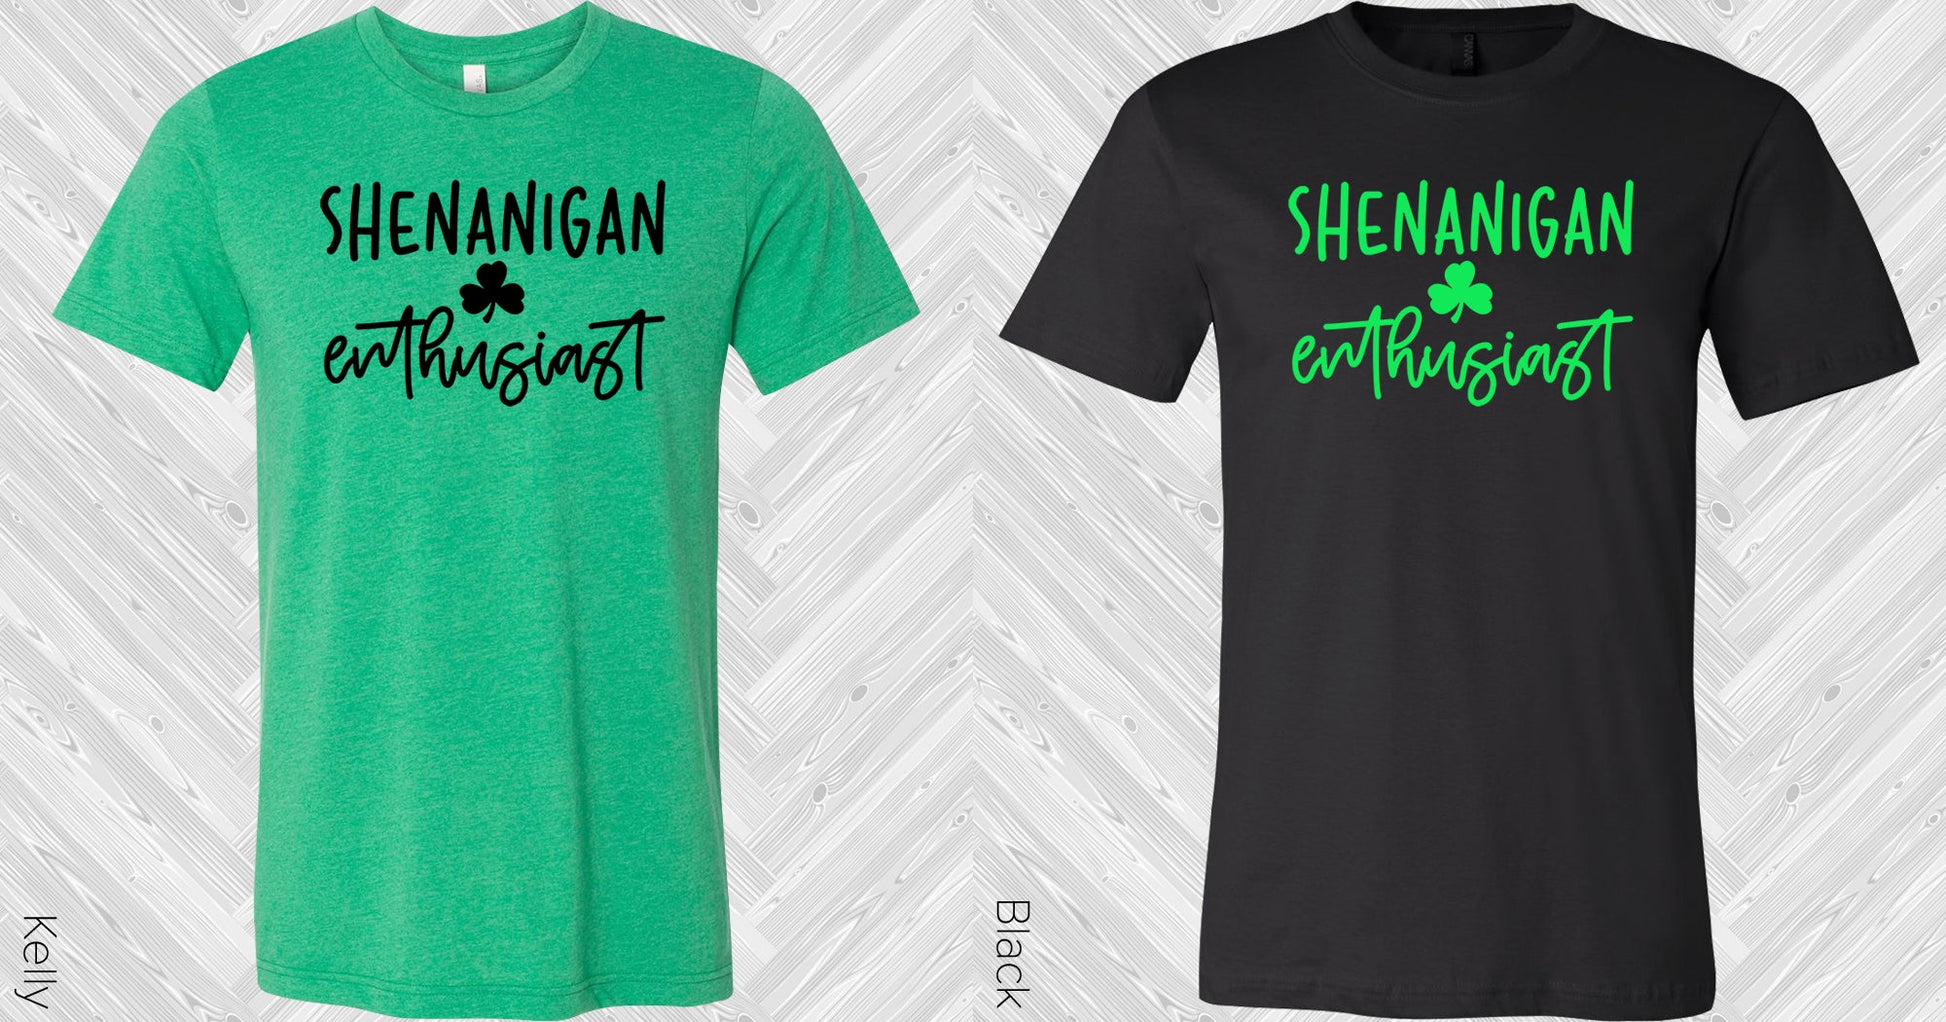 Shenanigan Enthusiast Graphic Tee Graphic Tee